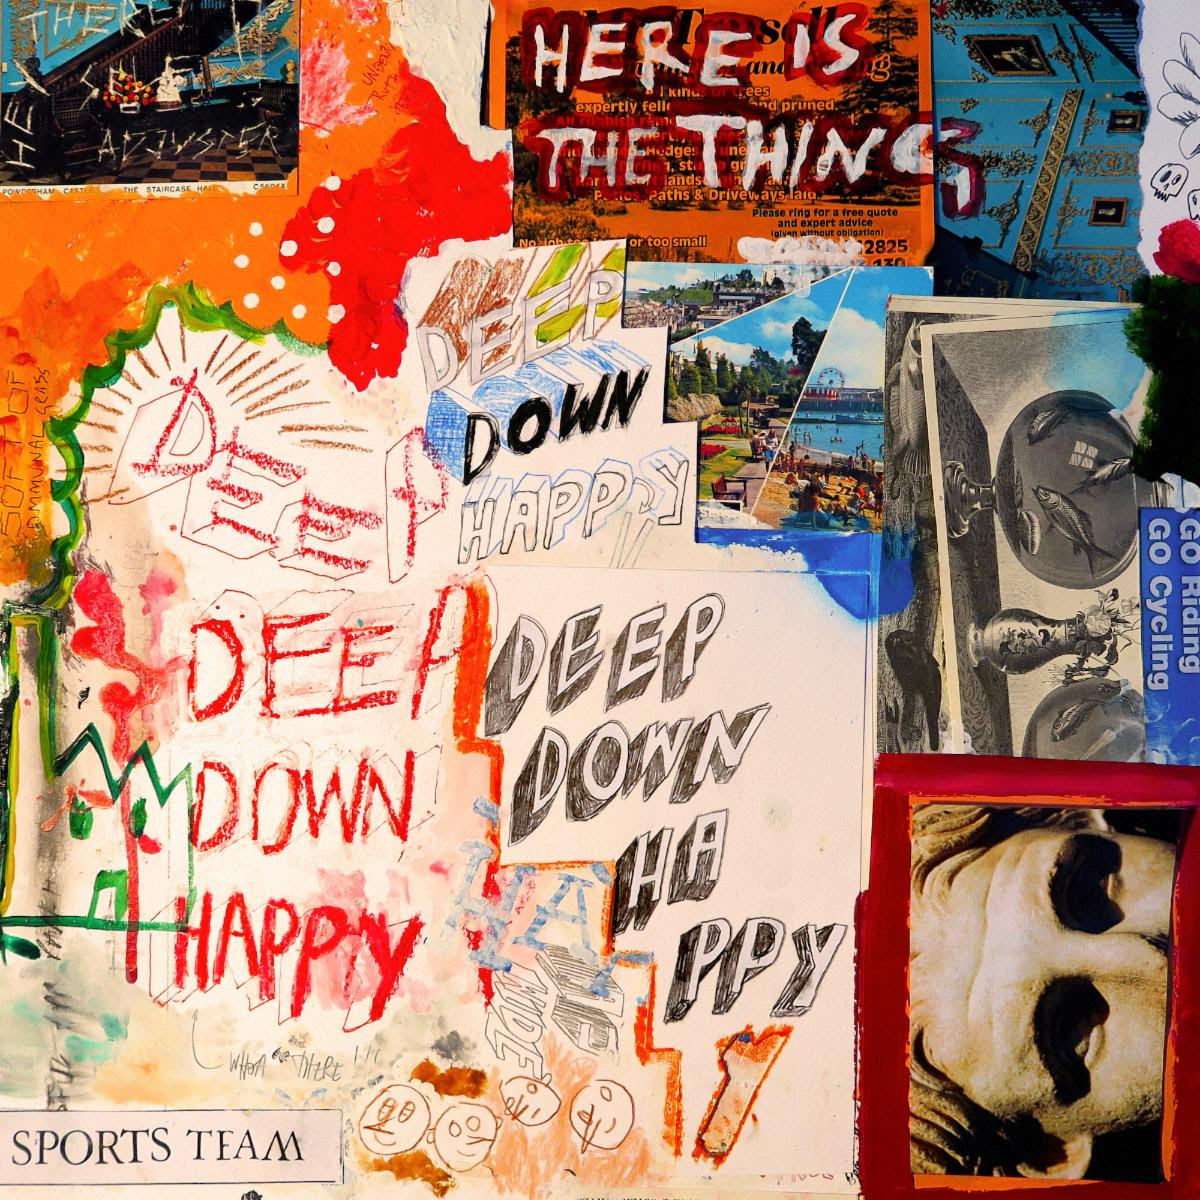 Deep Down Happy by Sports Team album review by Adam Williams for Northern Transmissions